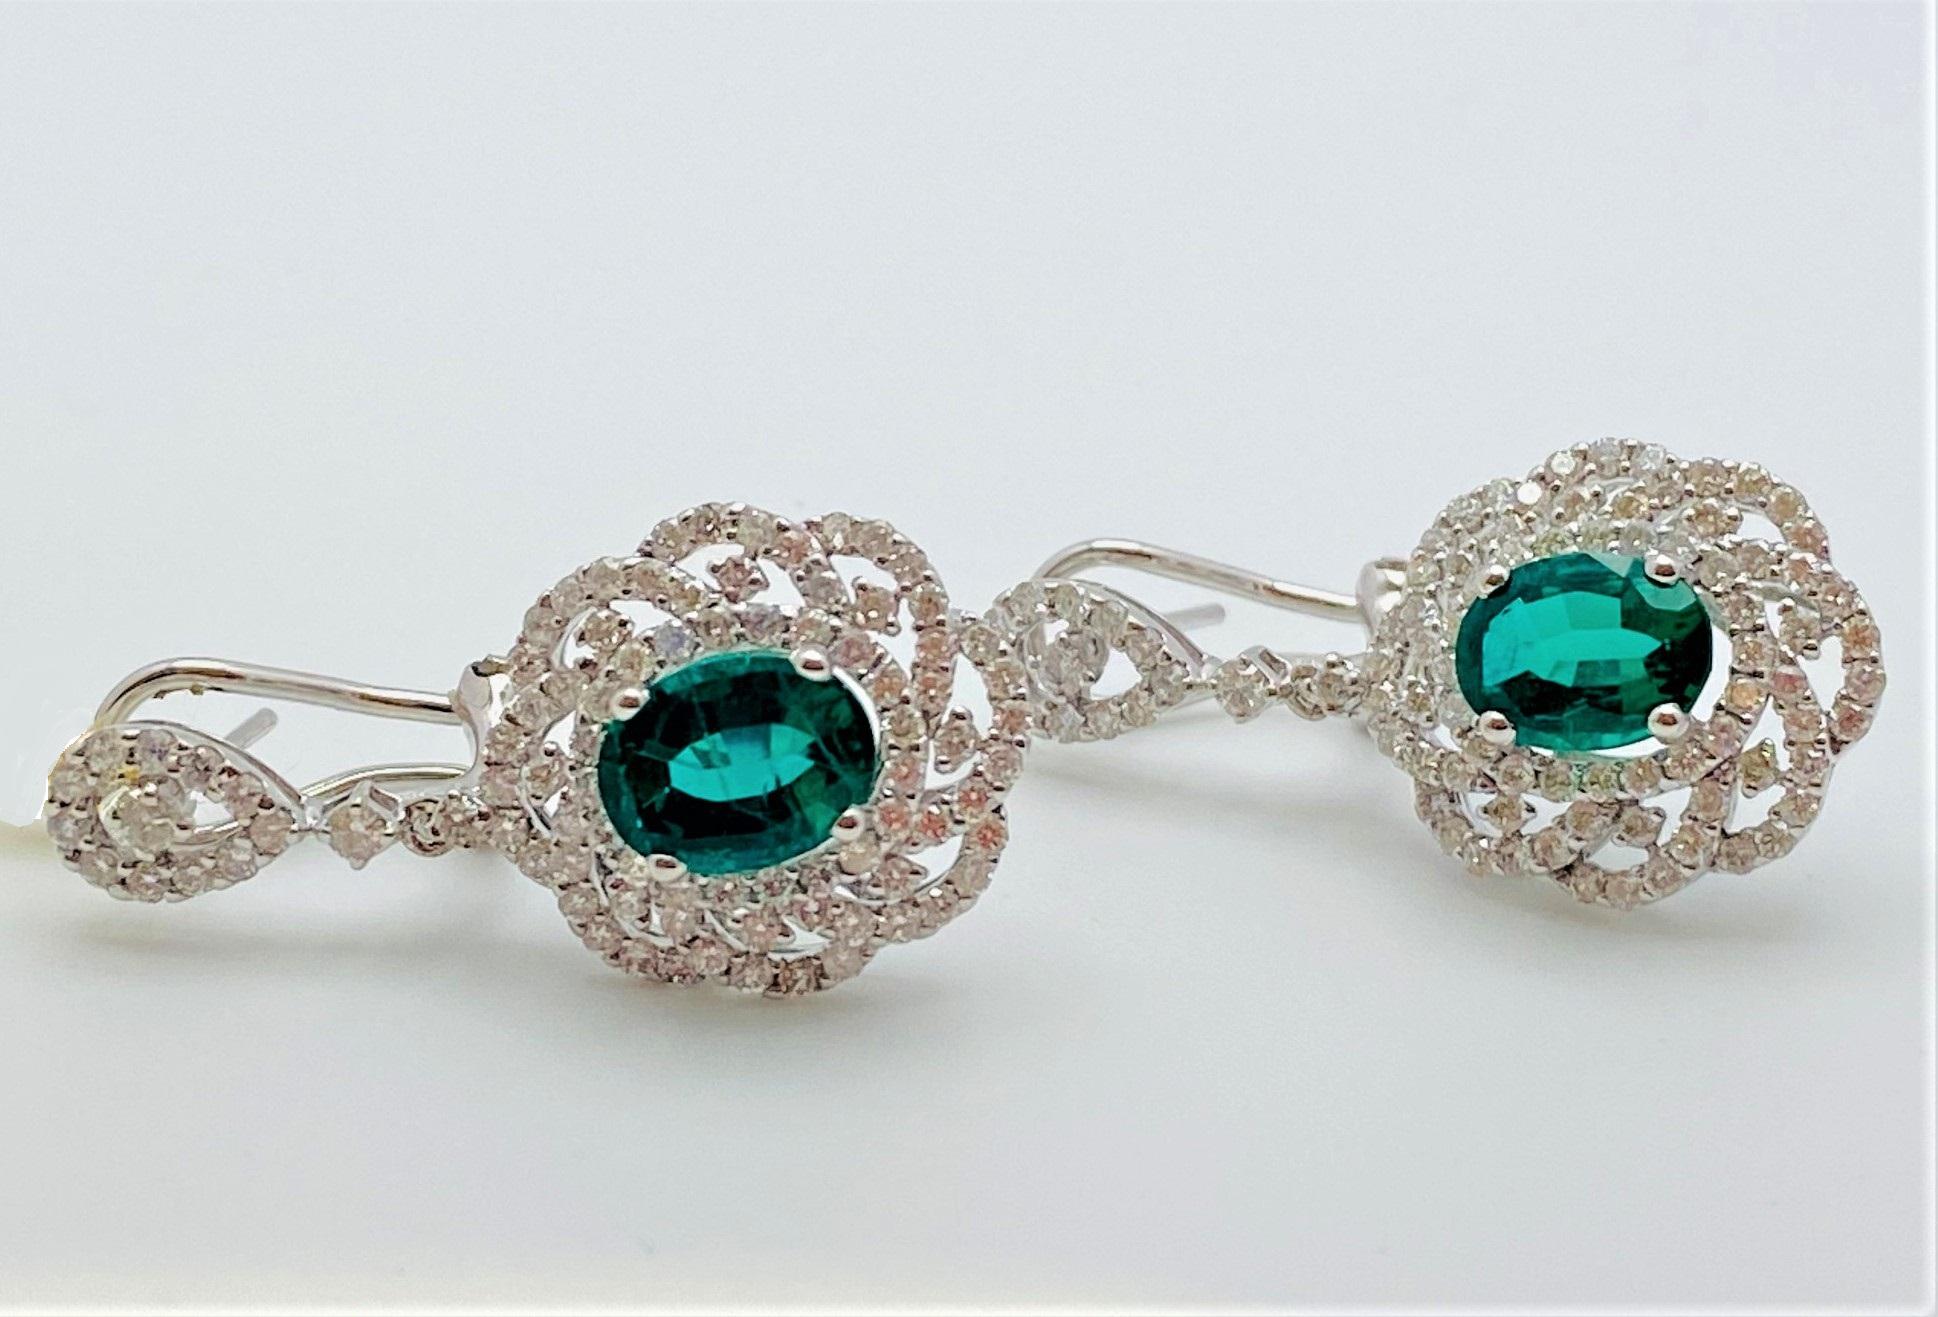 Extremely elegant emerald and diamond earrings featuring an assortment of round cut, prong set white diamonds over an oval cut emerald weighing 2.52 carats total, prong set center, enhanced buy a swirl pattern of round cut white diamonds two round